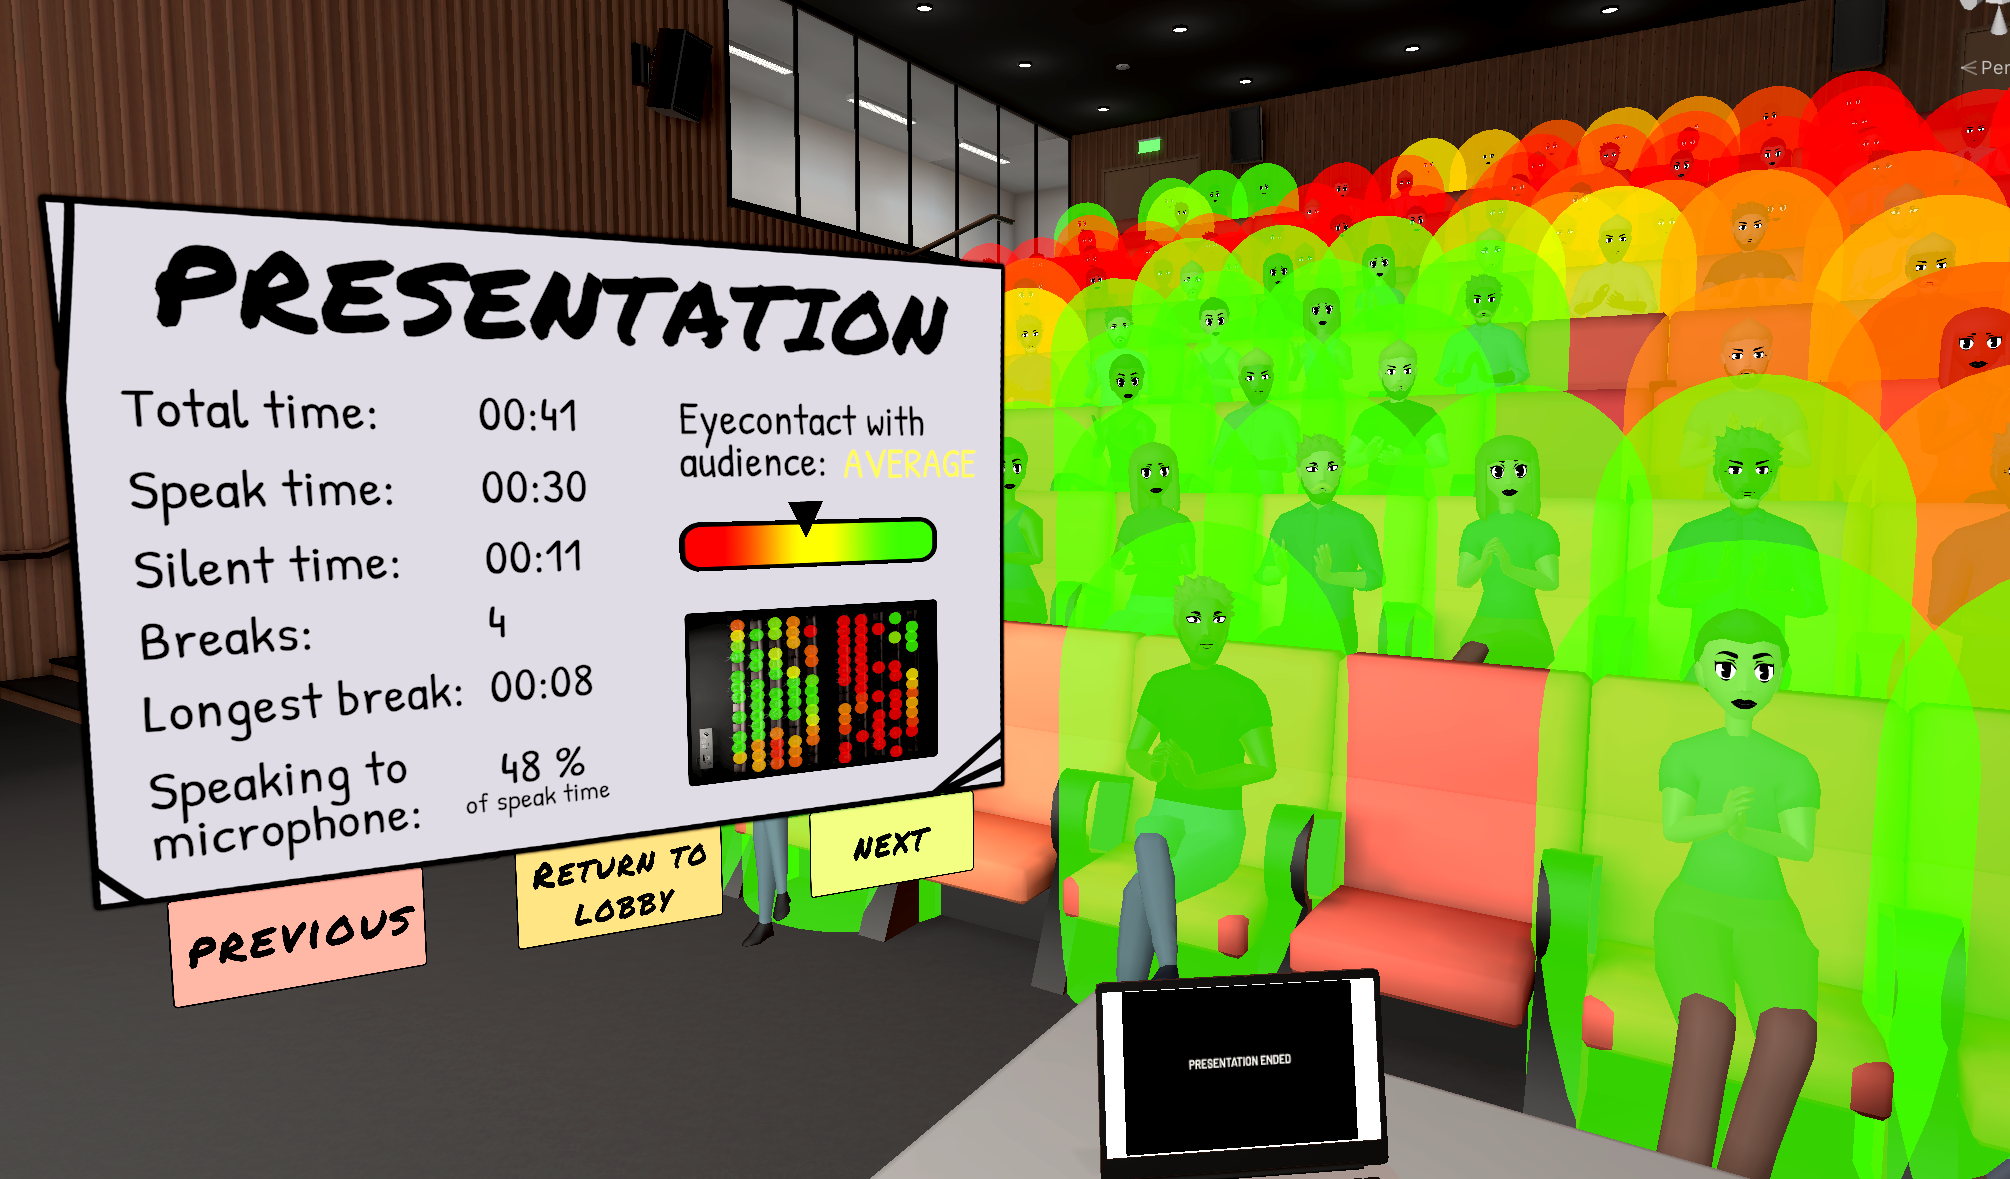 A screenshot of the PedaXR - Presentation Simulation with which Helsinki XR Center's intern Jesse Kosunen worked with during spring 2023. The image shows data with numbers and colours of how the presentation simulation went, based on e.g. how much eyecontact the speaker had with the audience.